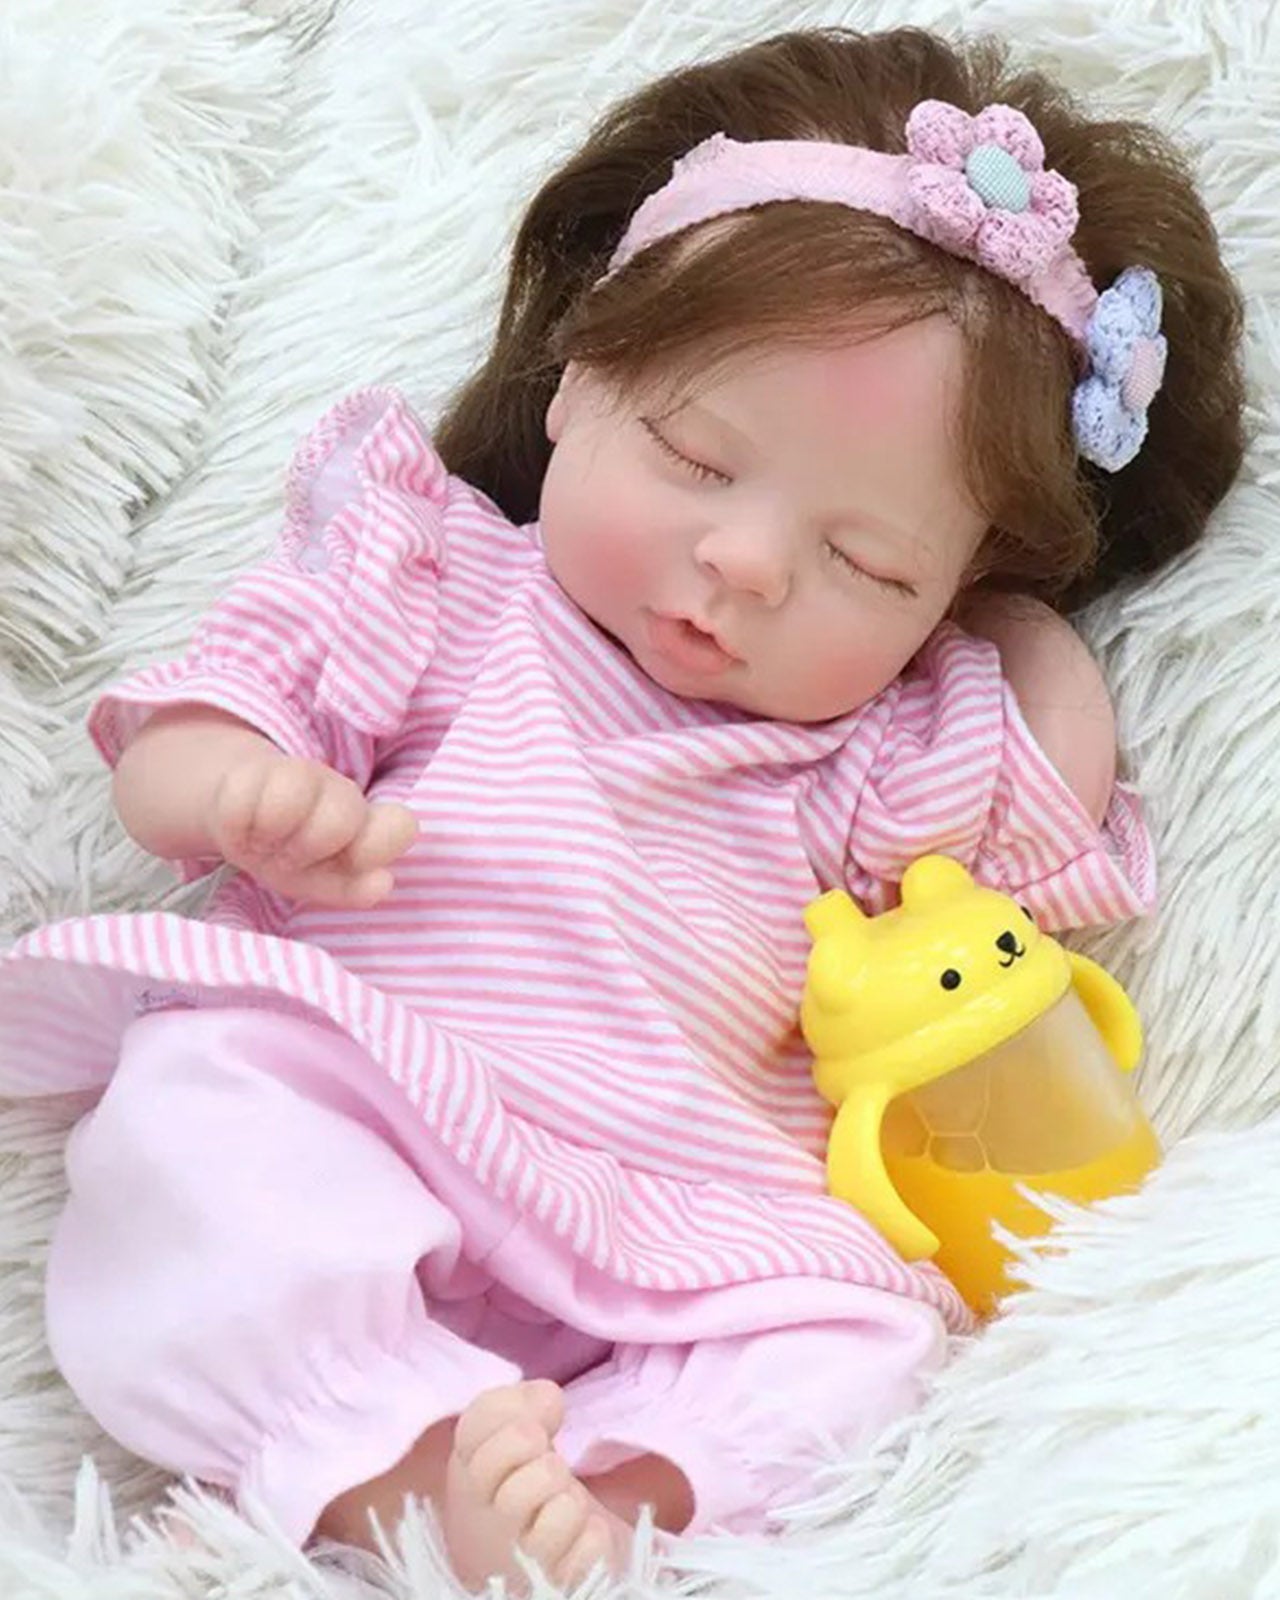 Jessica - 13" Full Silicone Reborn Baby Dolls Hand Painted Cute Newborn Girl With Rooted Hair